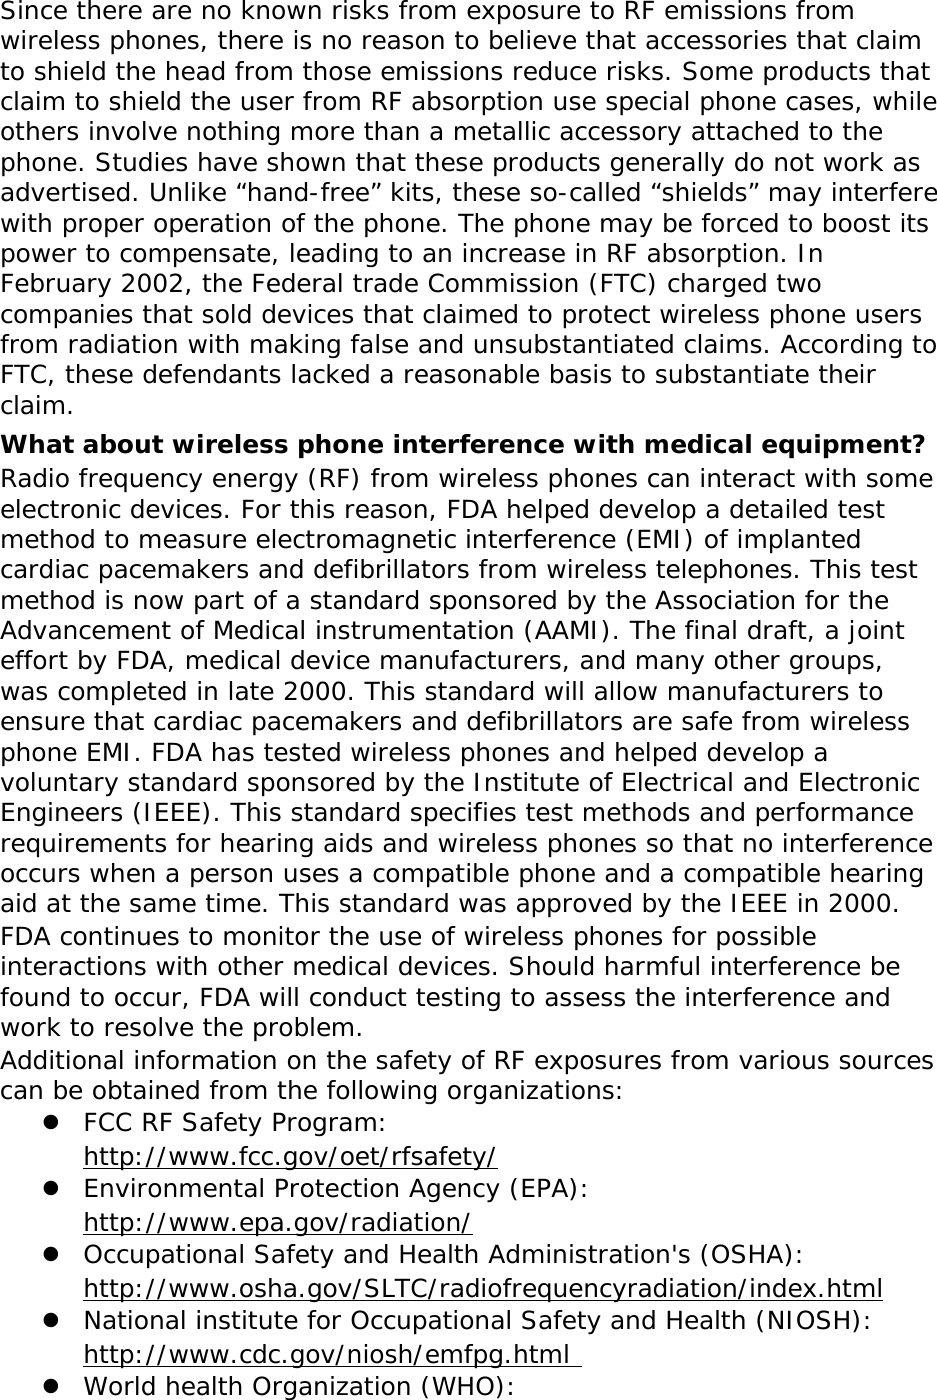 Since there are no known risks from exposure to RF emissions from wireless phones, there is no reason to believe that accessories that claim to shield the head from those emissions reduce risks. Some products that claim to shield the user from RF absorption use special phone cases, while others involve nothing more than a metallic accessory attached to the phone. Studies have shown that these products generally do not work as advertised. Unlike “hand-free” kits, these so-called “shields” may interfere with proper operation of the phone. The phone may be forced to boost its power to compensate, leading to an increase in RF absorption. In February 2002, the Federal trade Commission (FTC) charged two companies that sold devices that claimed to protect wireless phone users from radiation with making false and unsubstantiated claims. According to FTC, these defendants lacked a reasonable basis to substantiate their claim. What about wireless phone interference with medical equipment? Radio frequency energy (RF) from wireless phones can interact with some electronic devices. For this reason, FDA helped develop a detailed test method to measure electromagnetic interference (EMI) of implanted cardiac pacemakers and defibrillators from wireless telephones. This test method is now part of a standard sponsored by the Association for the Advancement of Medical instrumentation (AAMI). The final draft, a joint effort by FDA, medical device manufacturers, and many other groups, was completed in late 2000. This standard will allow manufacturers to ensure that cardiac pacemakers and defibrillators are safe from wireless phone EMI. FDA has tested wireless phones and helped develop a voluntary standard sponsored by the Institute of Electrical and Electronic Engineers (IEEE). This standard specifies test methods and performance requirements for hearing aids and wireless phones so that no interference occurs when a person uses a compatible phone and a compatible hearing aid at the same time. This standard was approved by the IEEE in 2000. FDA continues to monitor the use of wireless phones for possible interactions with other medical devices. Should harmful interference be found to occur, FDA will conduct testing to assess the interference and work to resolve the problem. Additional information on the safety of RF exposures from various sources can be obtained from the following organizations: z FCC RF Safety Program:  http://www.fcc.gov/oet/rfsafety/z Environmental Protection Agency (EPA):  http://www.epa.gov/radiation/z Occupational Safety and Health Administration&apos;s (OSHA):        http://www.osha.gov/SLTC/radiofrequencyradiation/index.htmlz National institute for Occupational Safety and Health (NIOSH):  http://www.cdc.gov/niosh/emfpg.html  z World health Organization (WHO): 